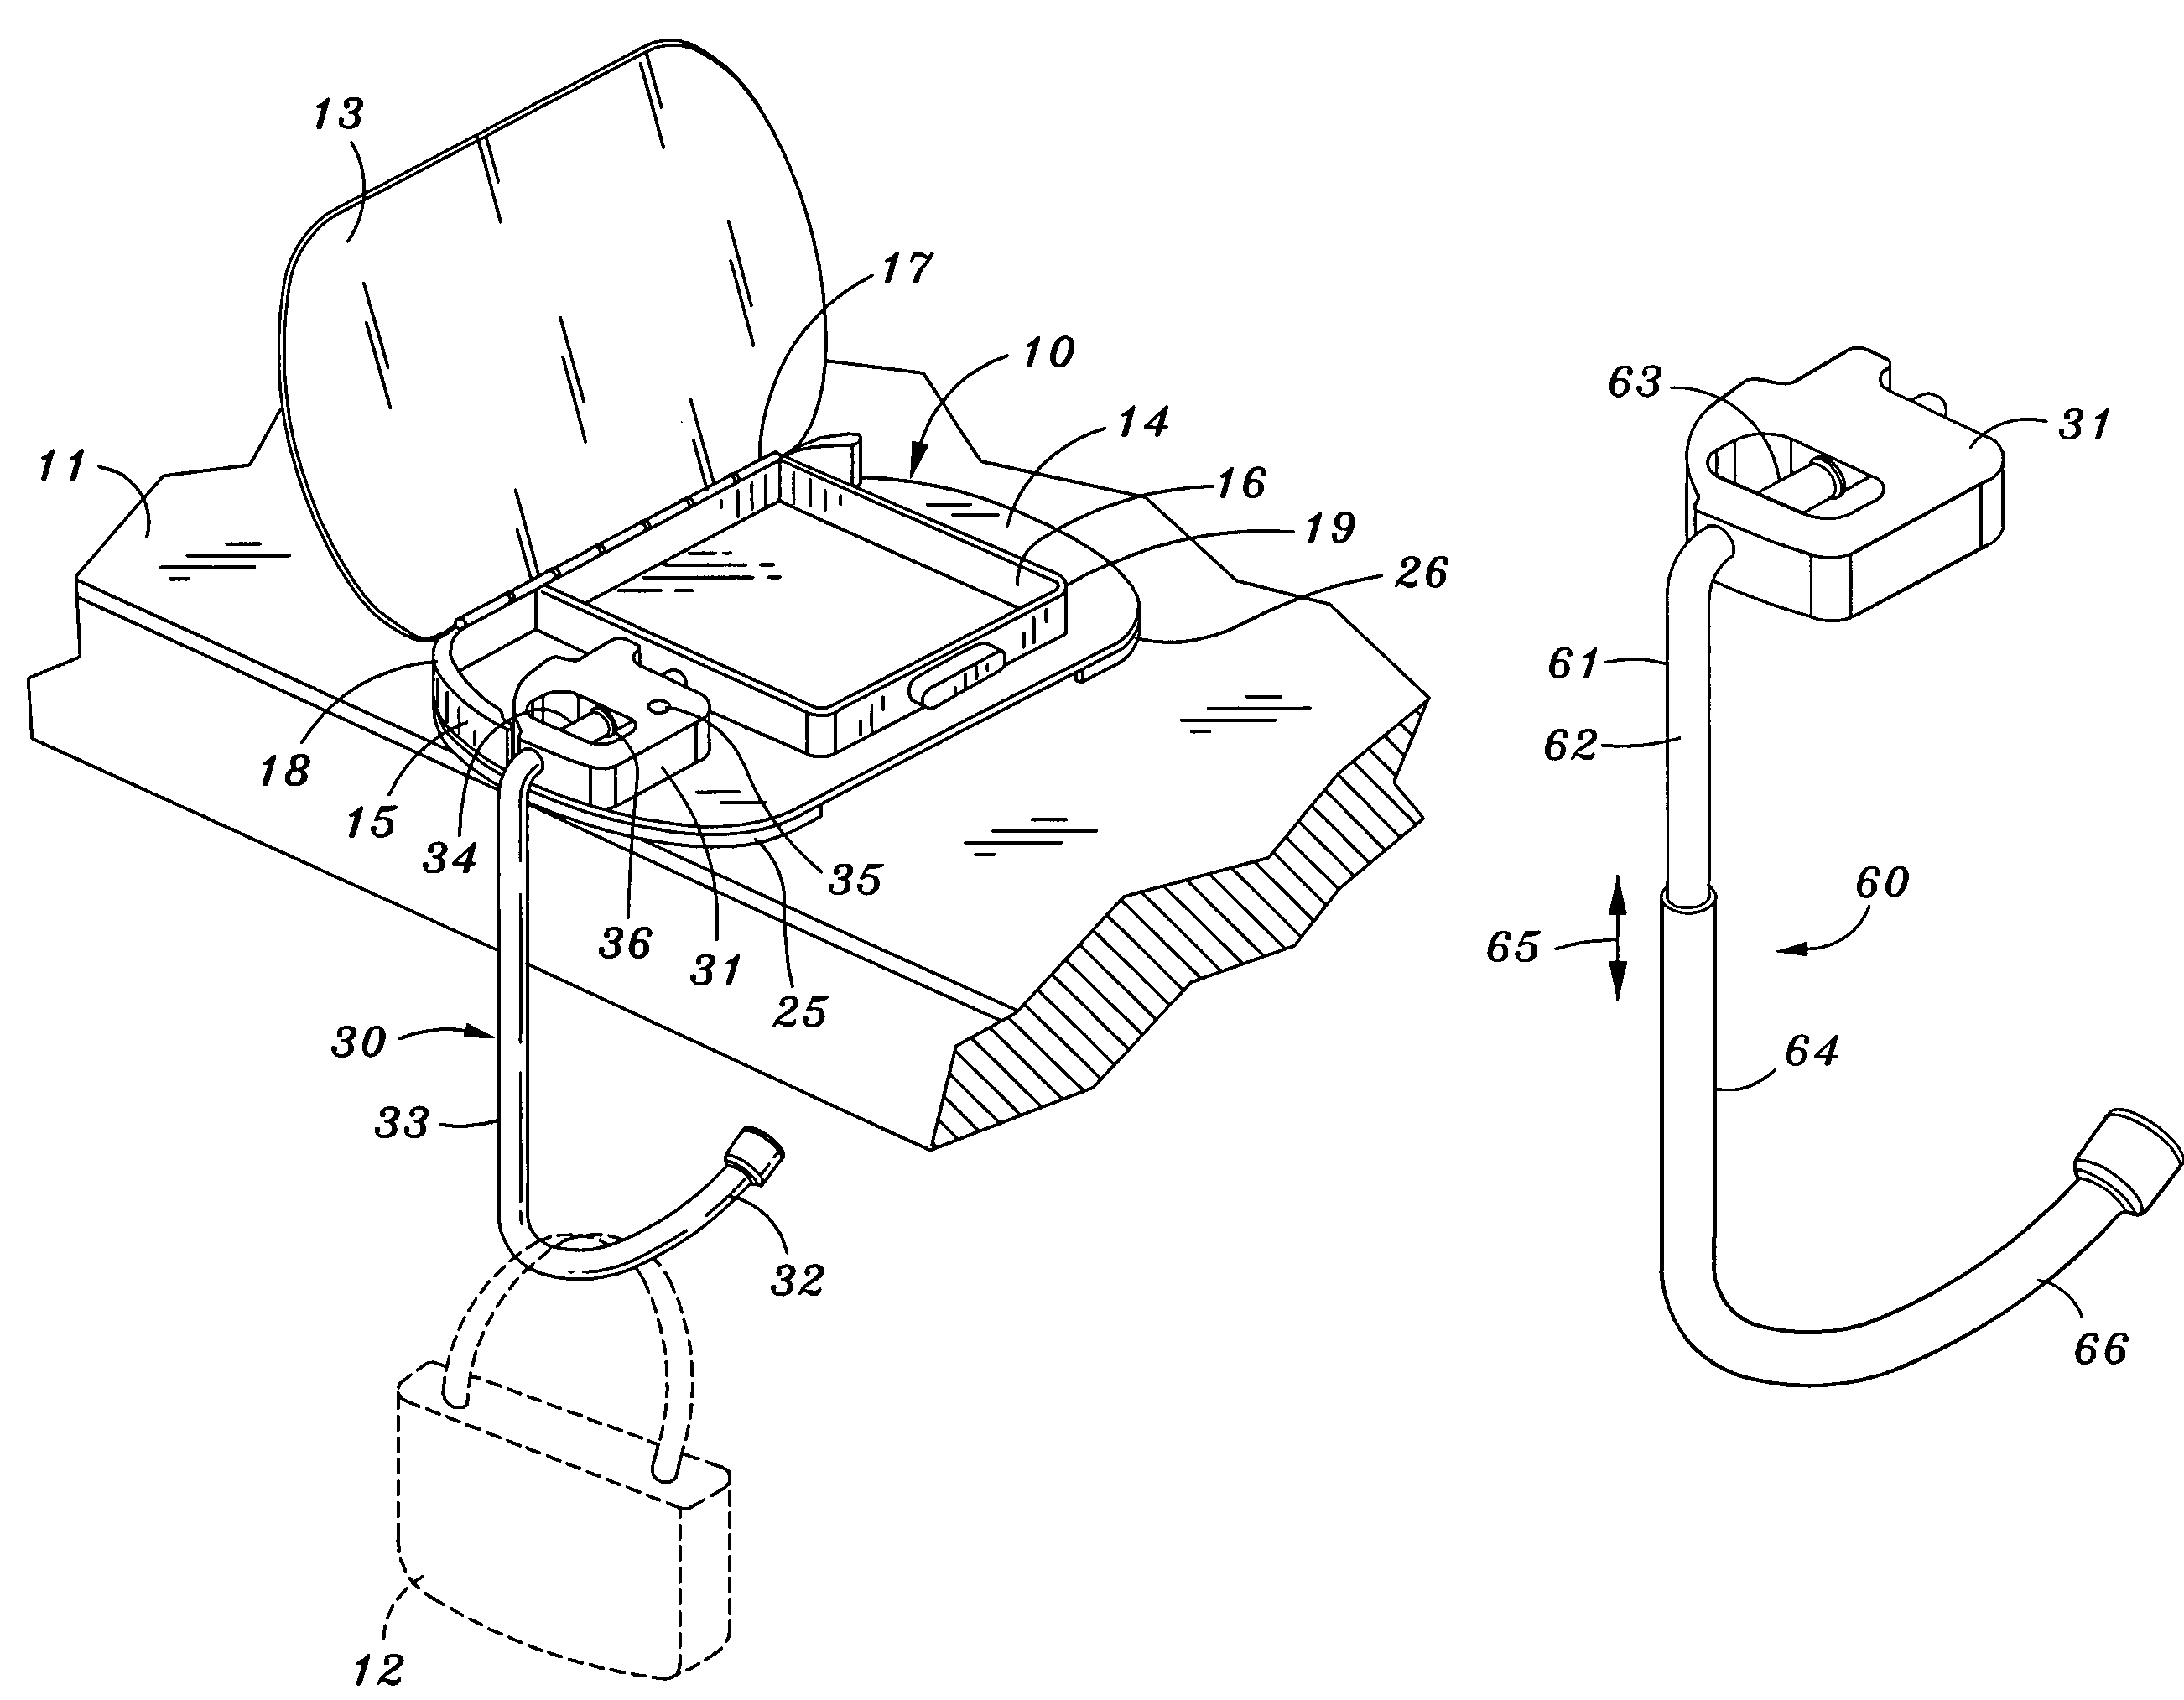 Table edge supporting apparatus